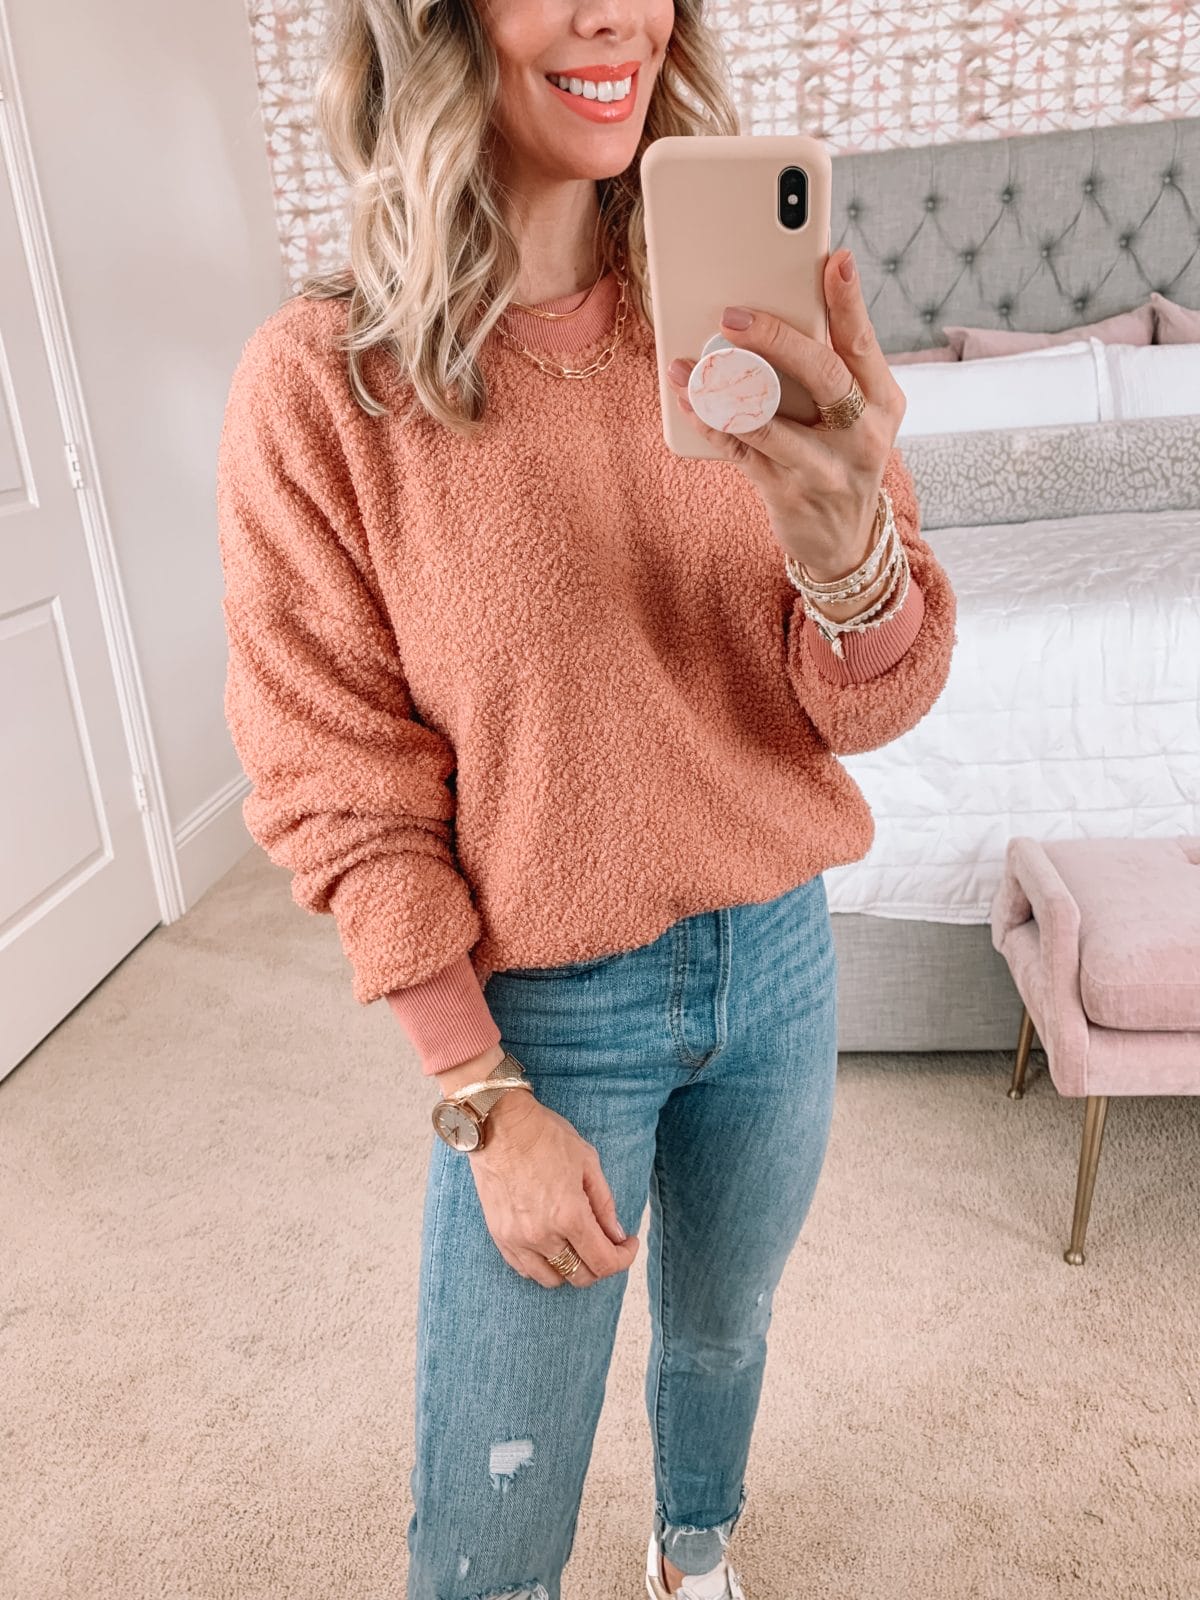 Amazon Fashion Faves, Sweater, Jeans, Sneakers 